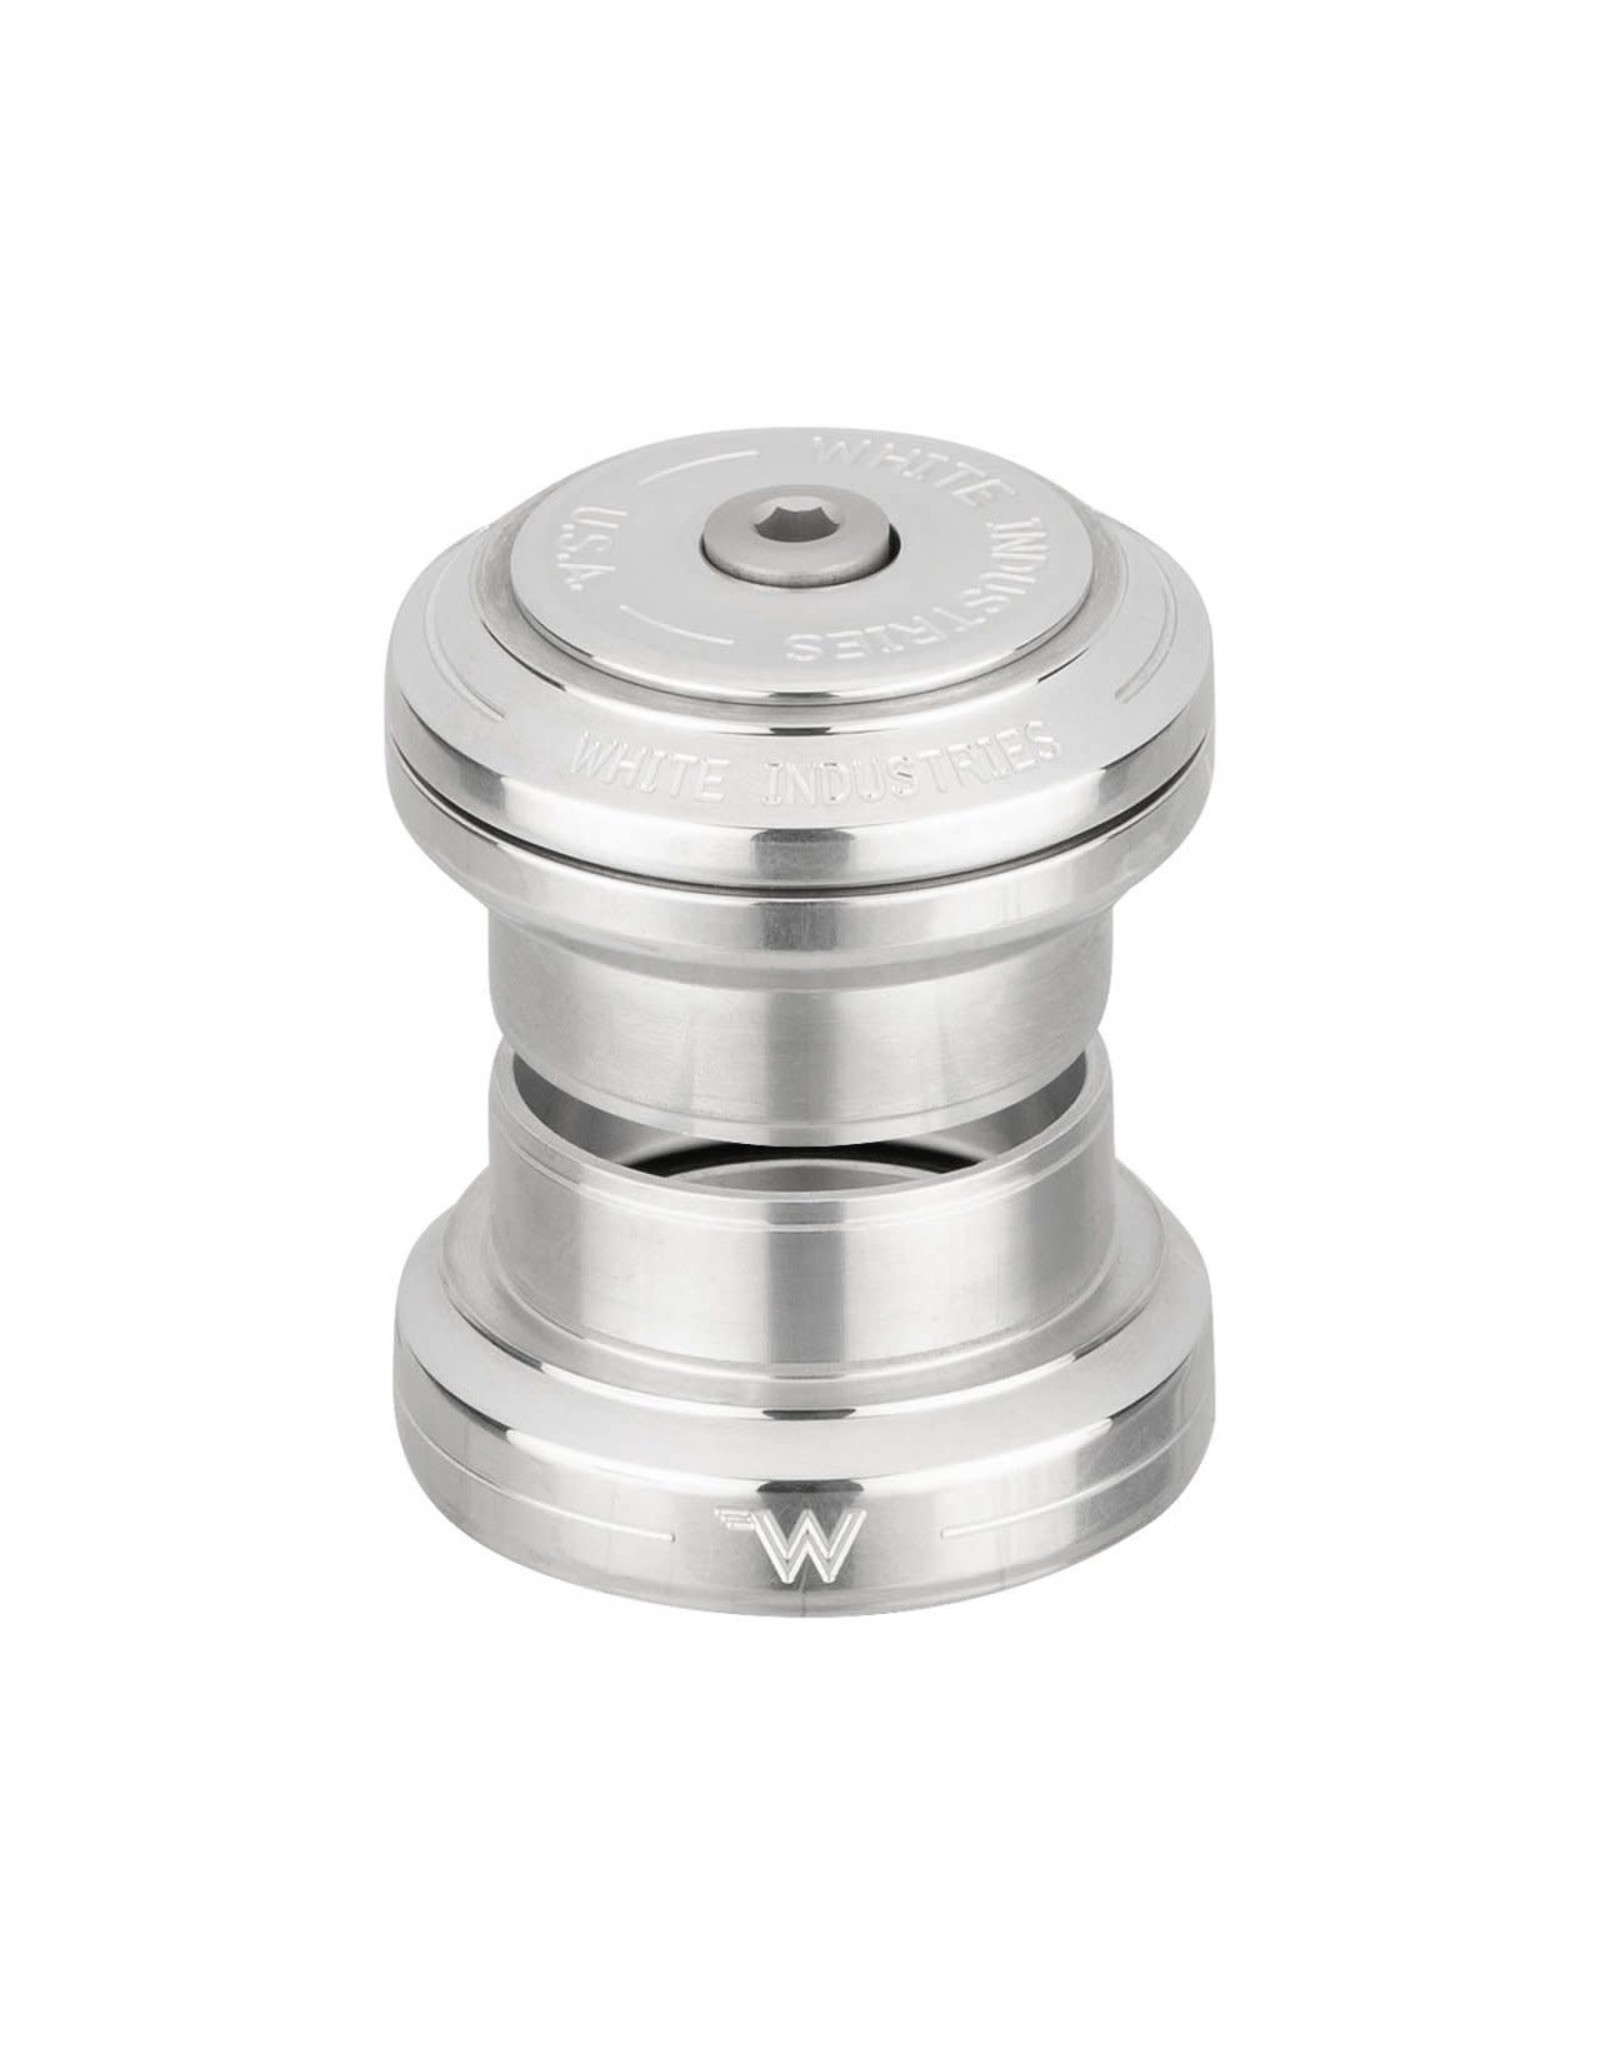 White Industries White Industries Threadless Headset 1 1/8" EC34 Polished Silver